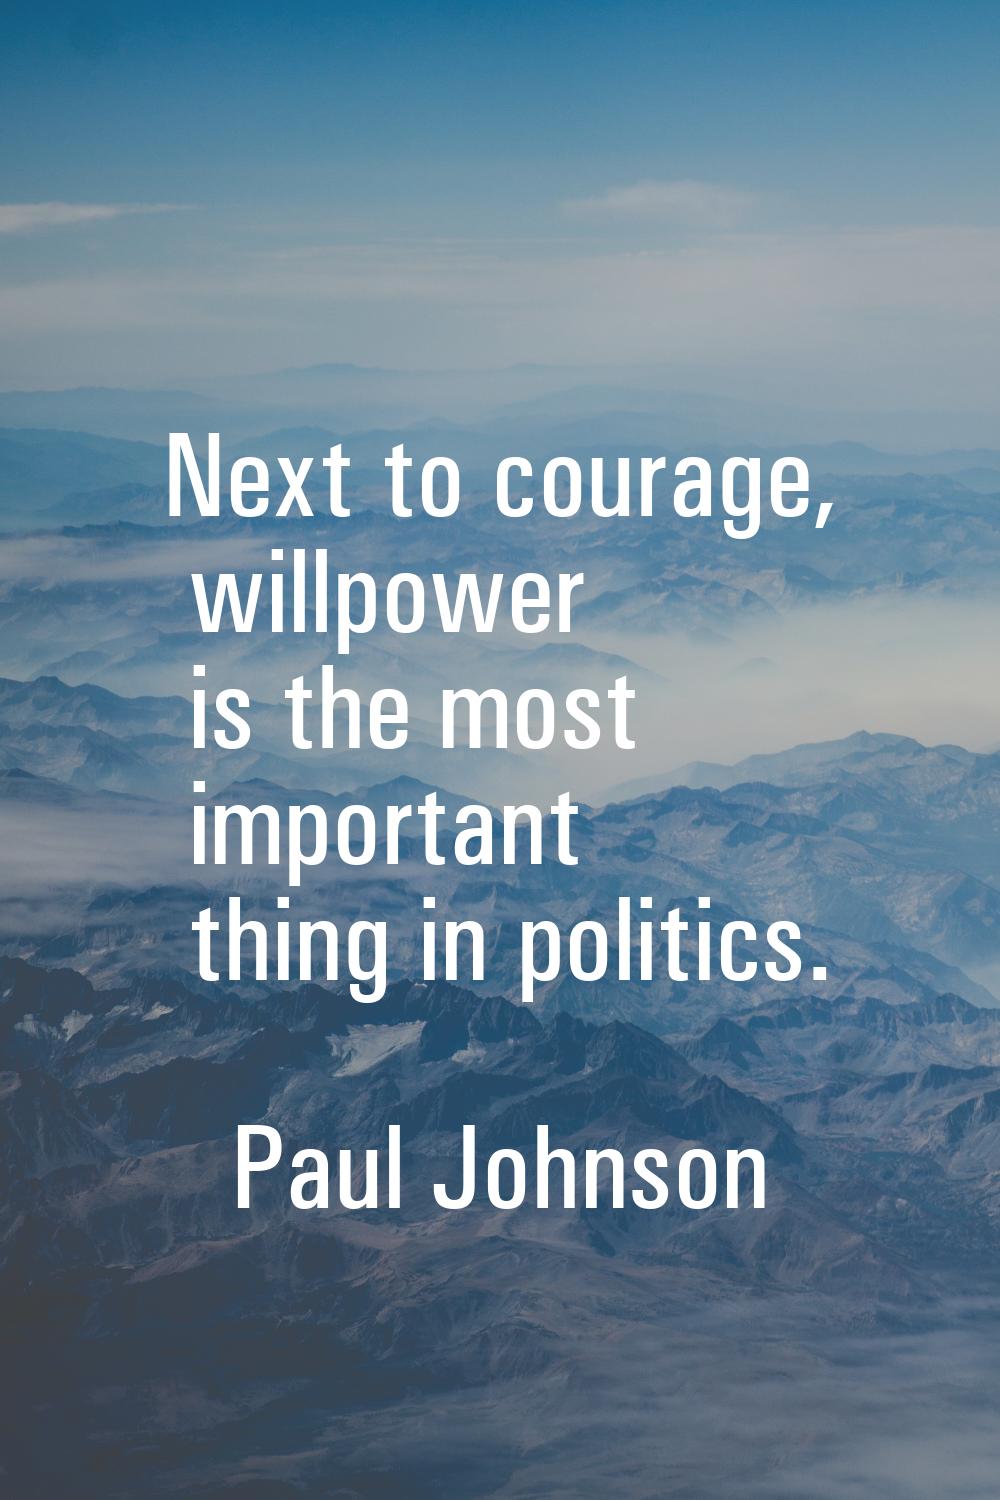 Next to courage, willpower is the most important thing in politics.